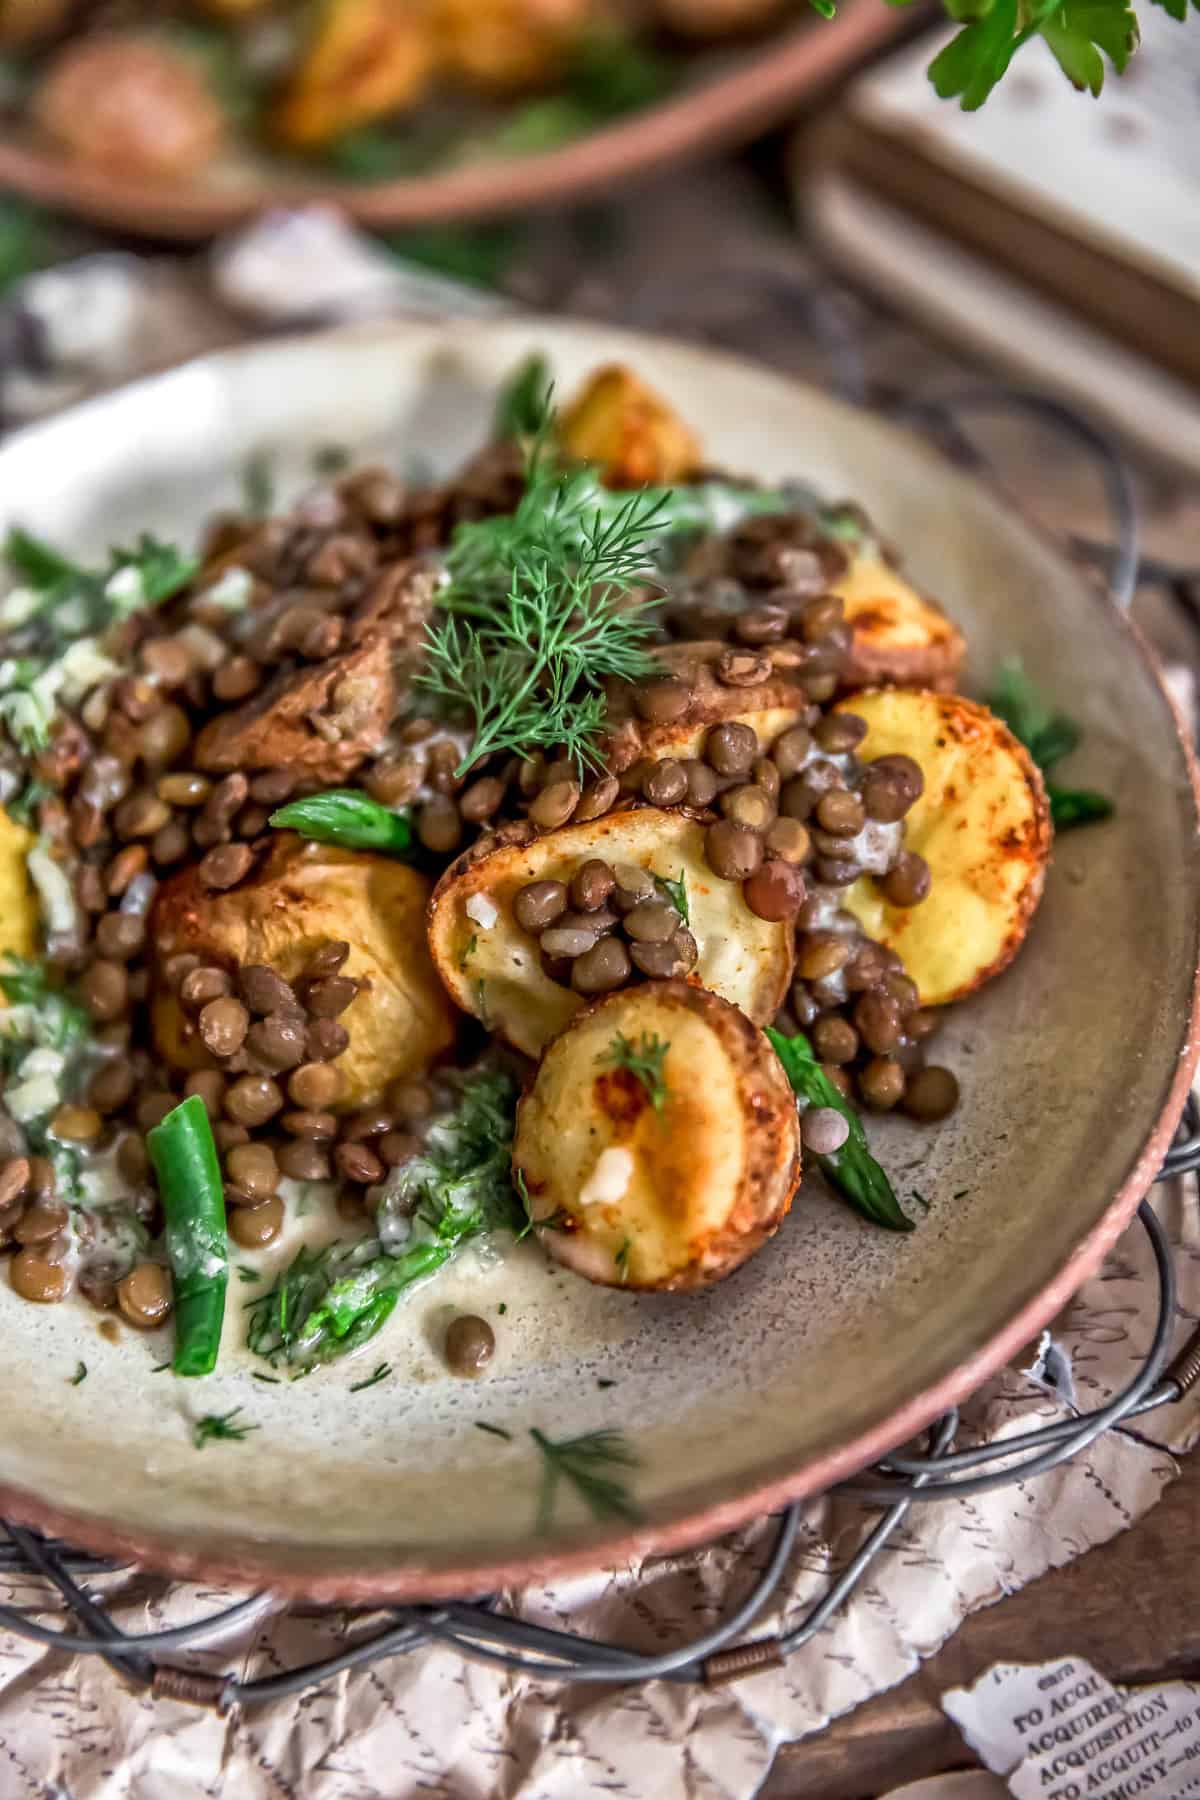 Roasted Potatoes with Seasoned Lentils and Dill Sauce